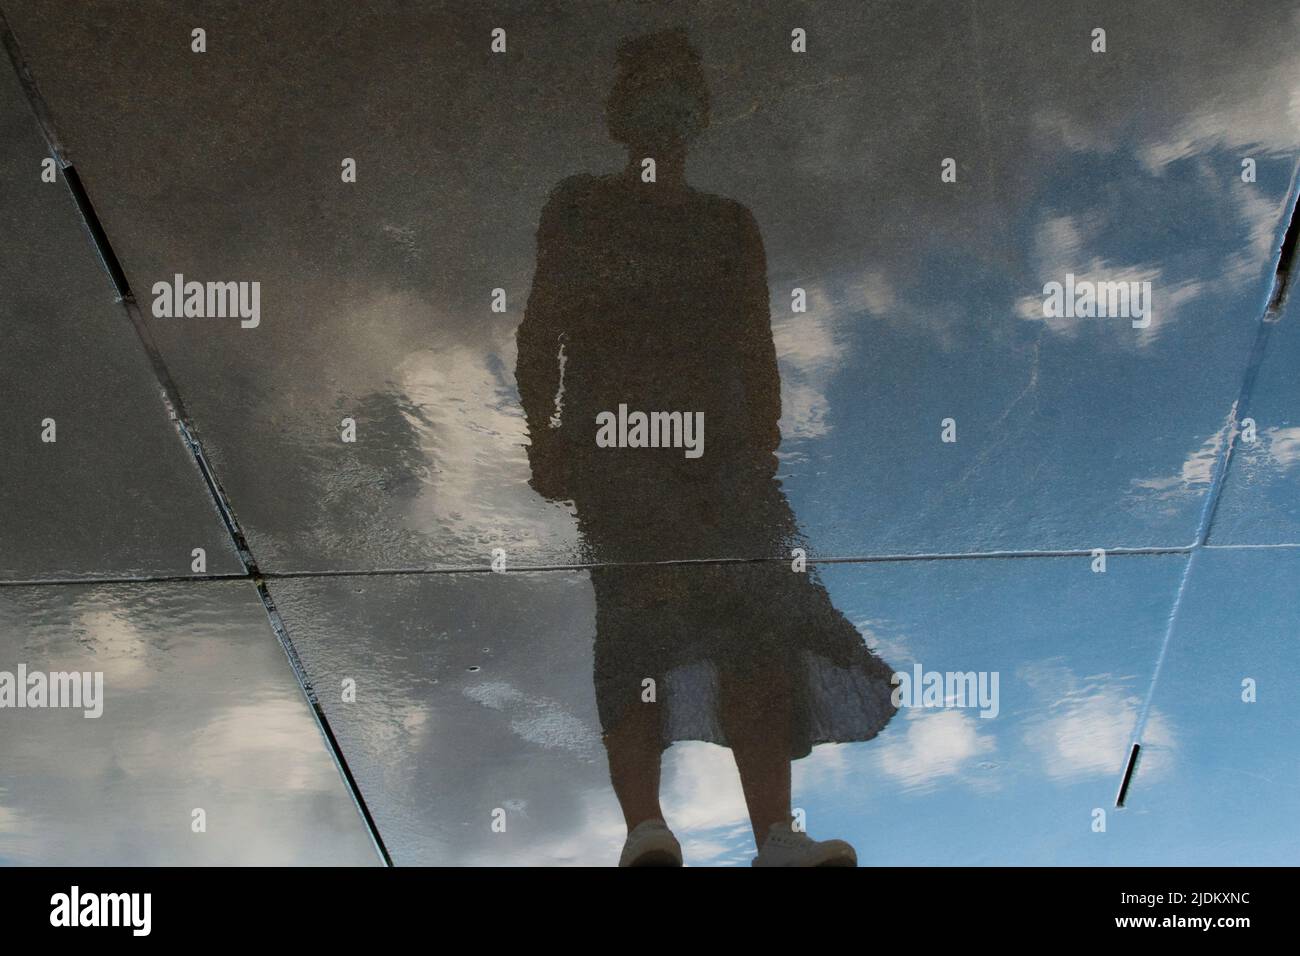 Reflection of the silhouette of a woman on a mirror of water. Enigmatic and ghostly. Place for text. Stock Photo